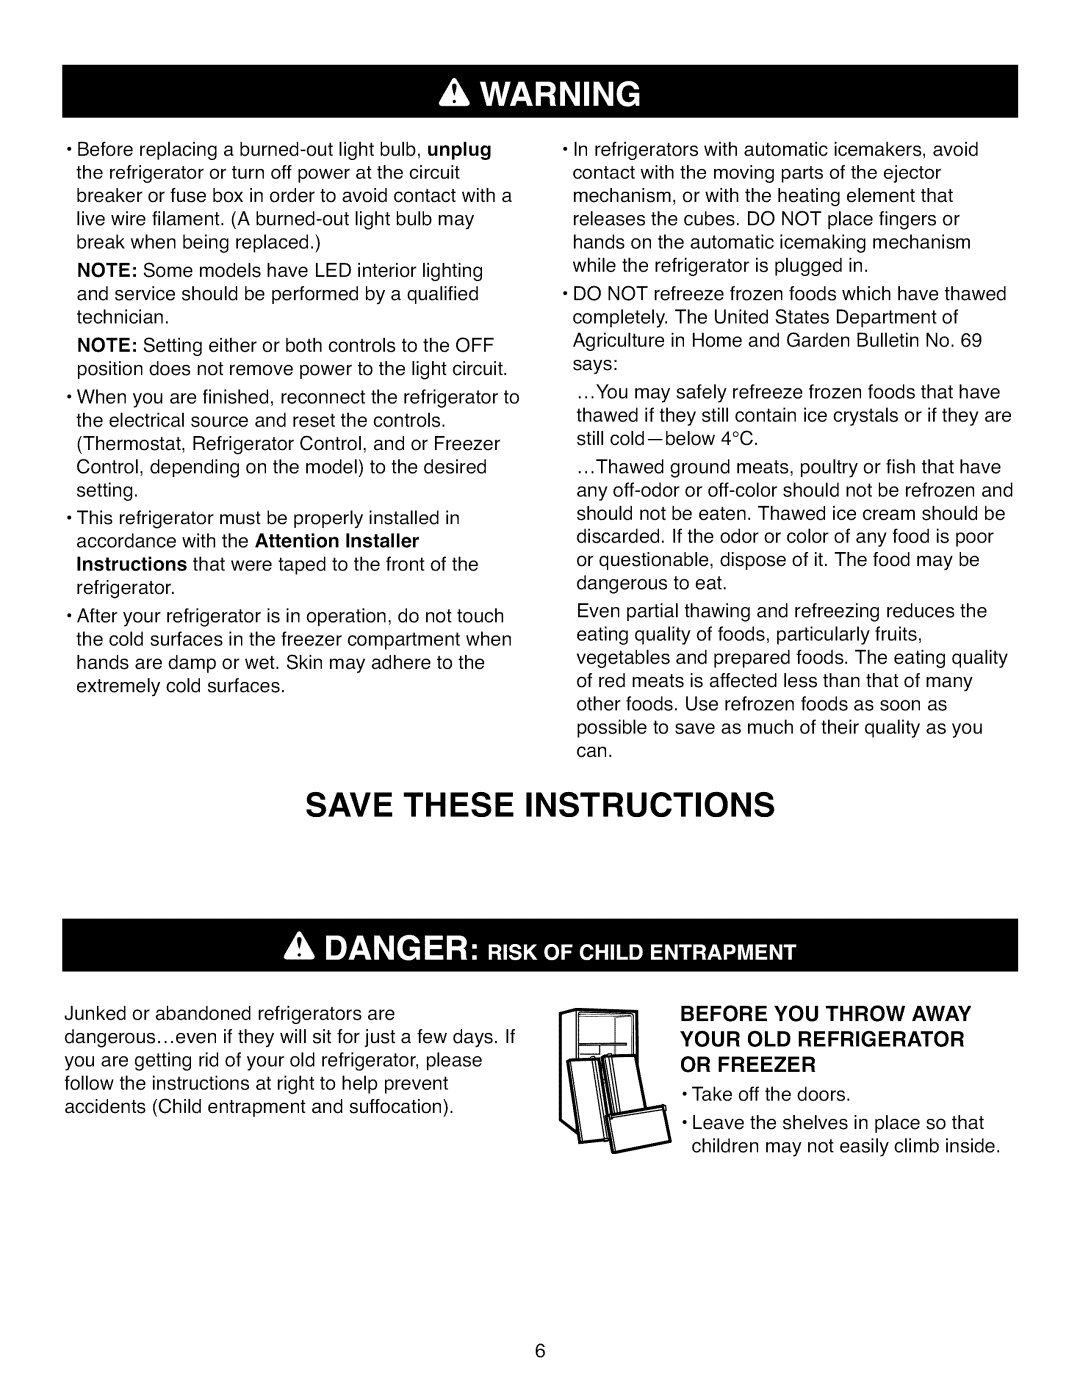 Kenmore 795.7105 Save These Instructions, Before You Throw Away, Your Old Refrigerator Or Freezer, • Take off the doors 